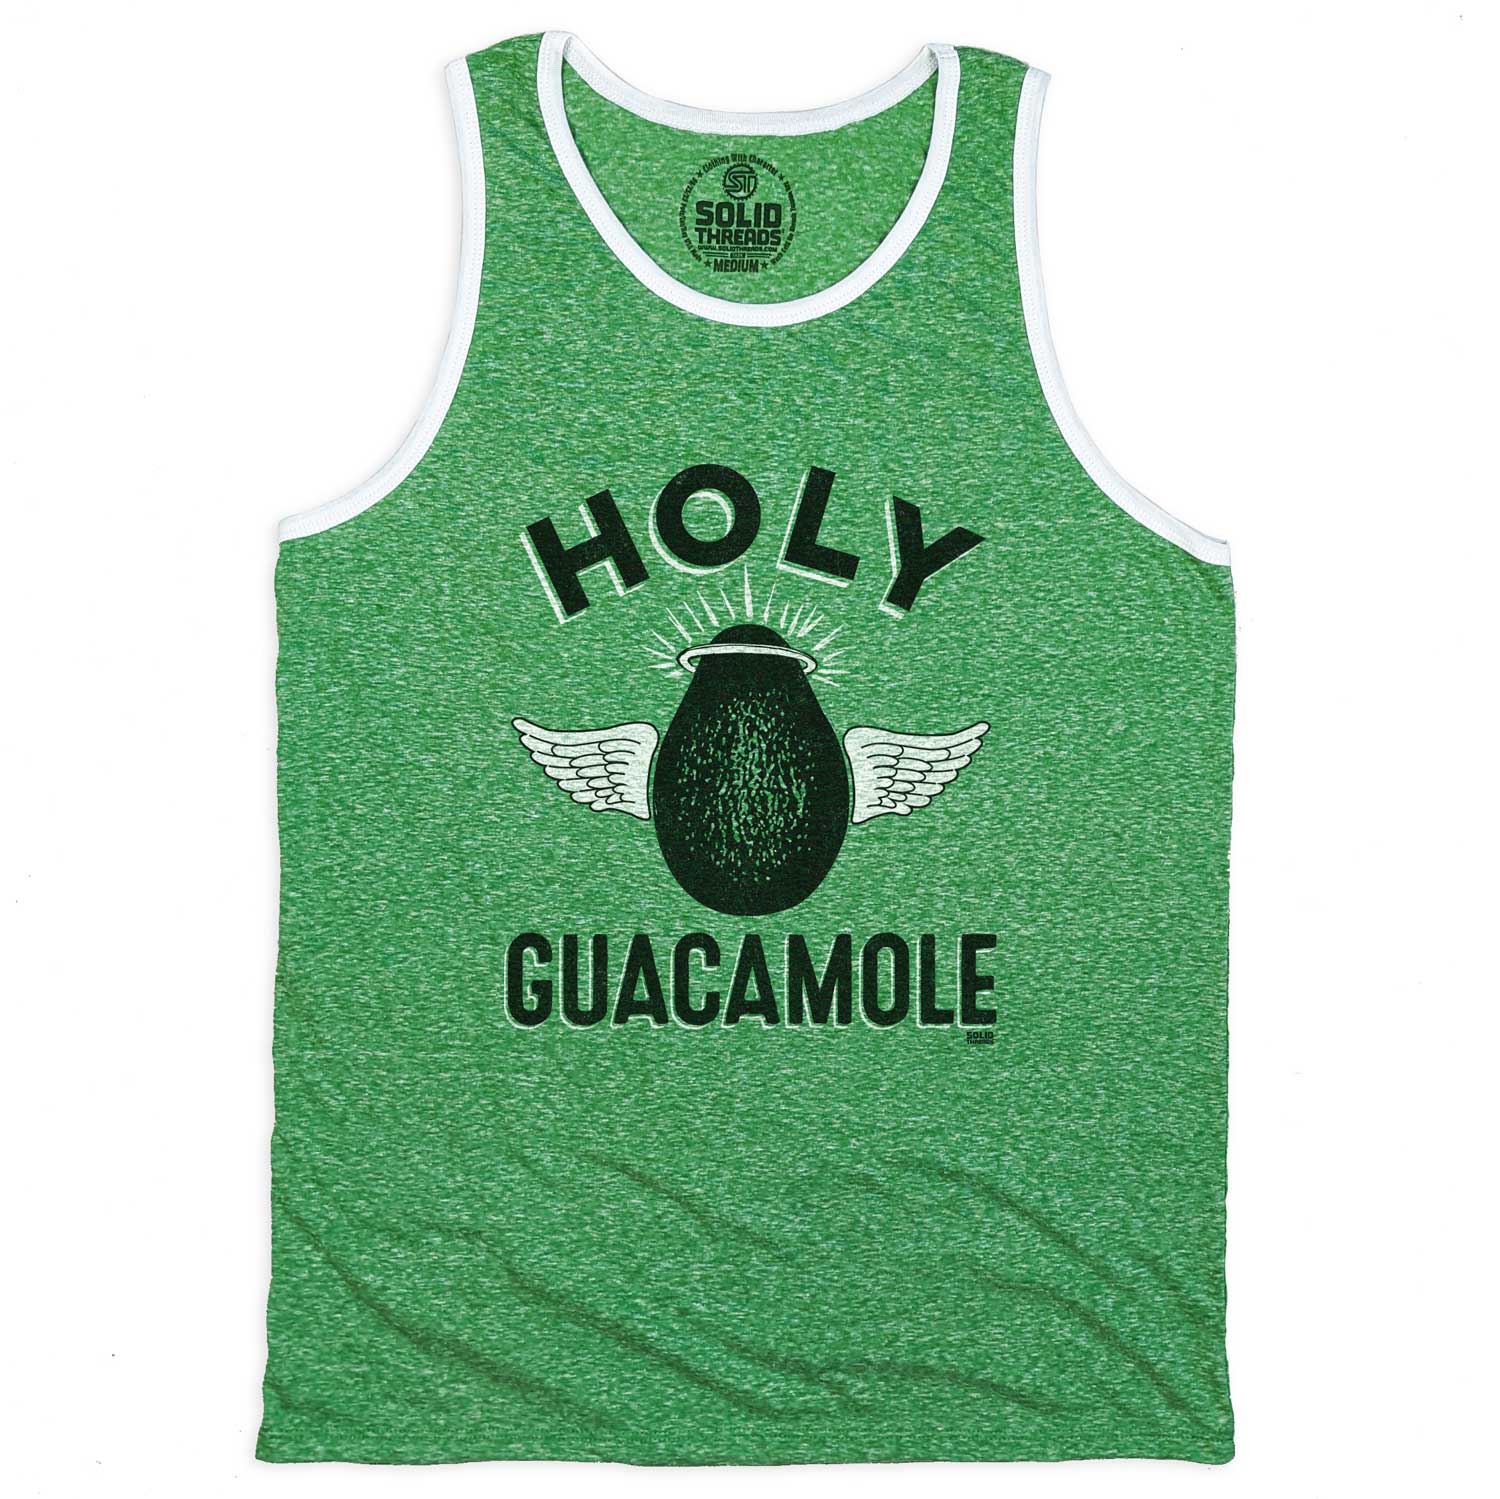 Men's Cool Holy Guacamole Retro Graphic Tank Top | Funny Foodie Sleeveless Shirt | SOLID THREADS